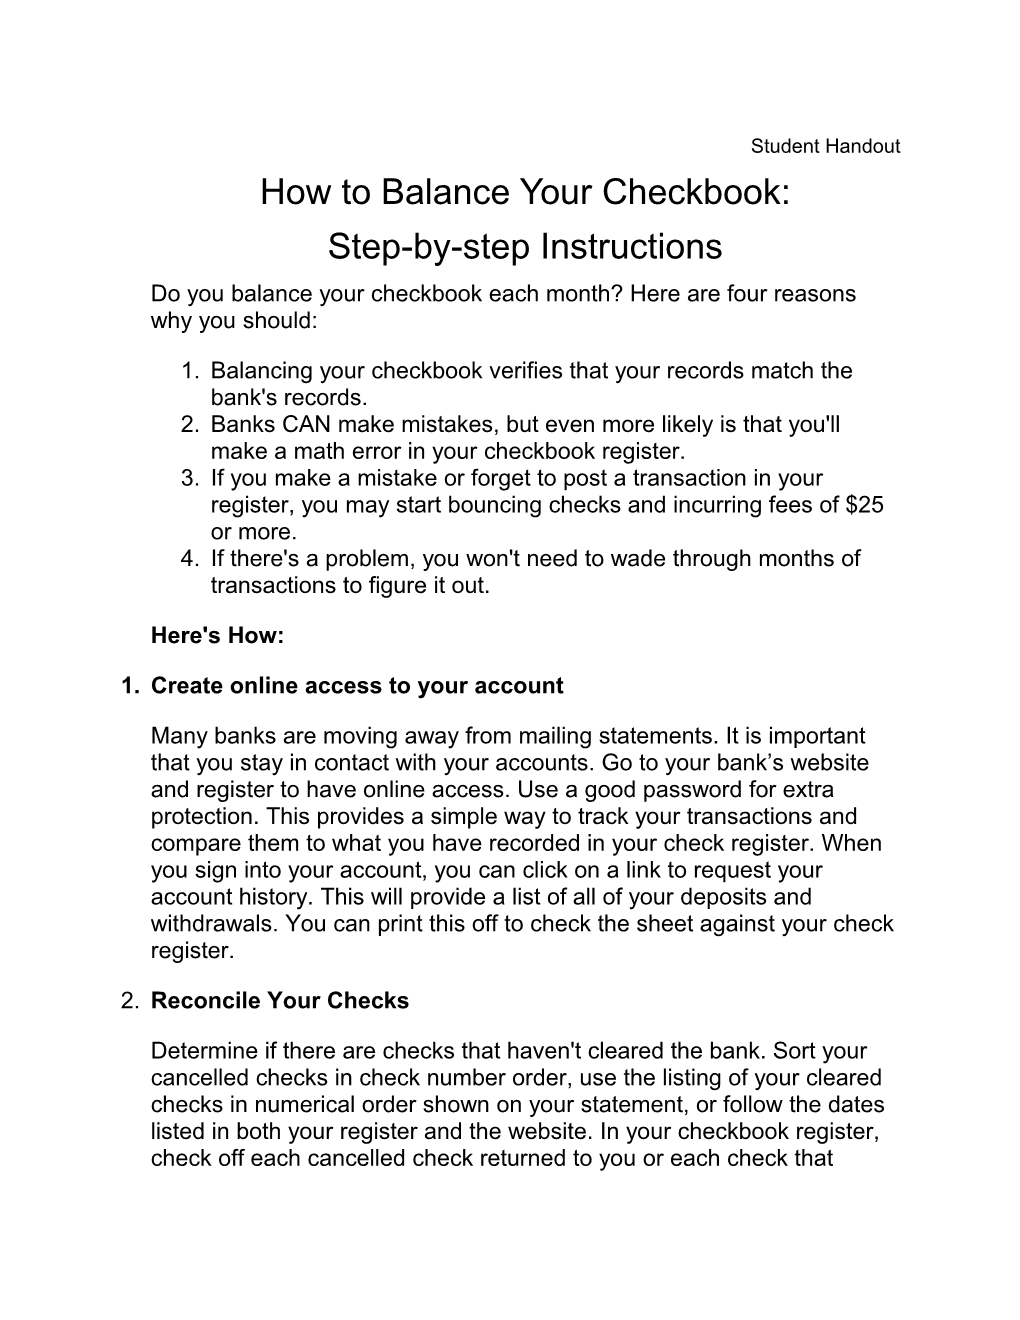 How to Balance Your Checkbook